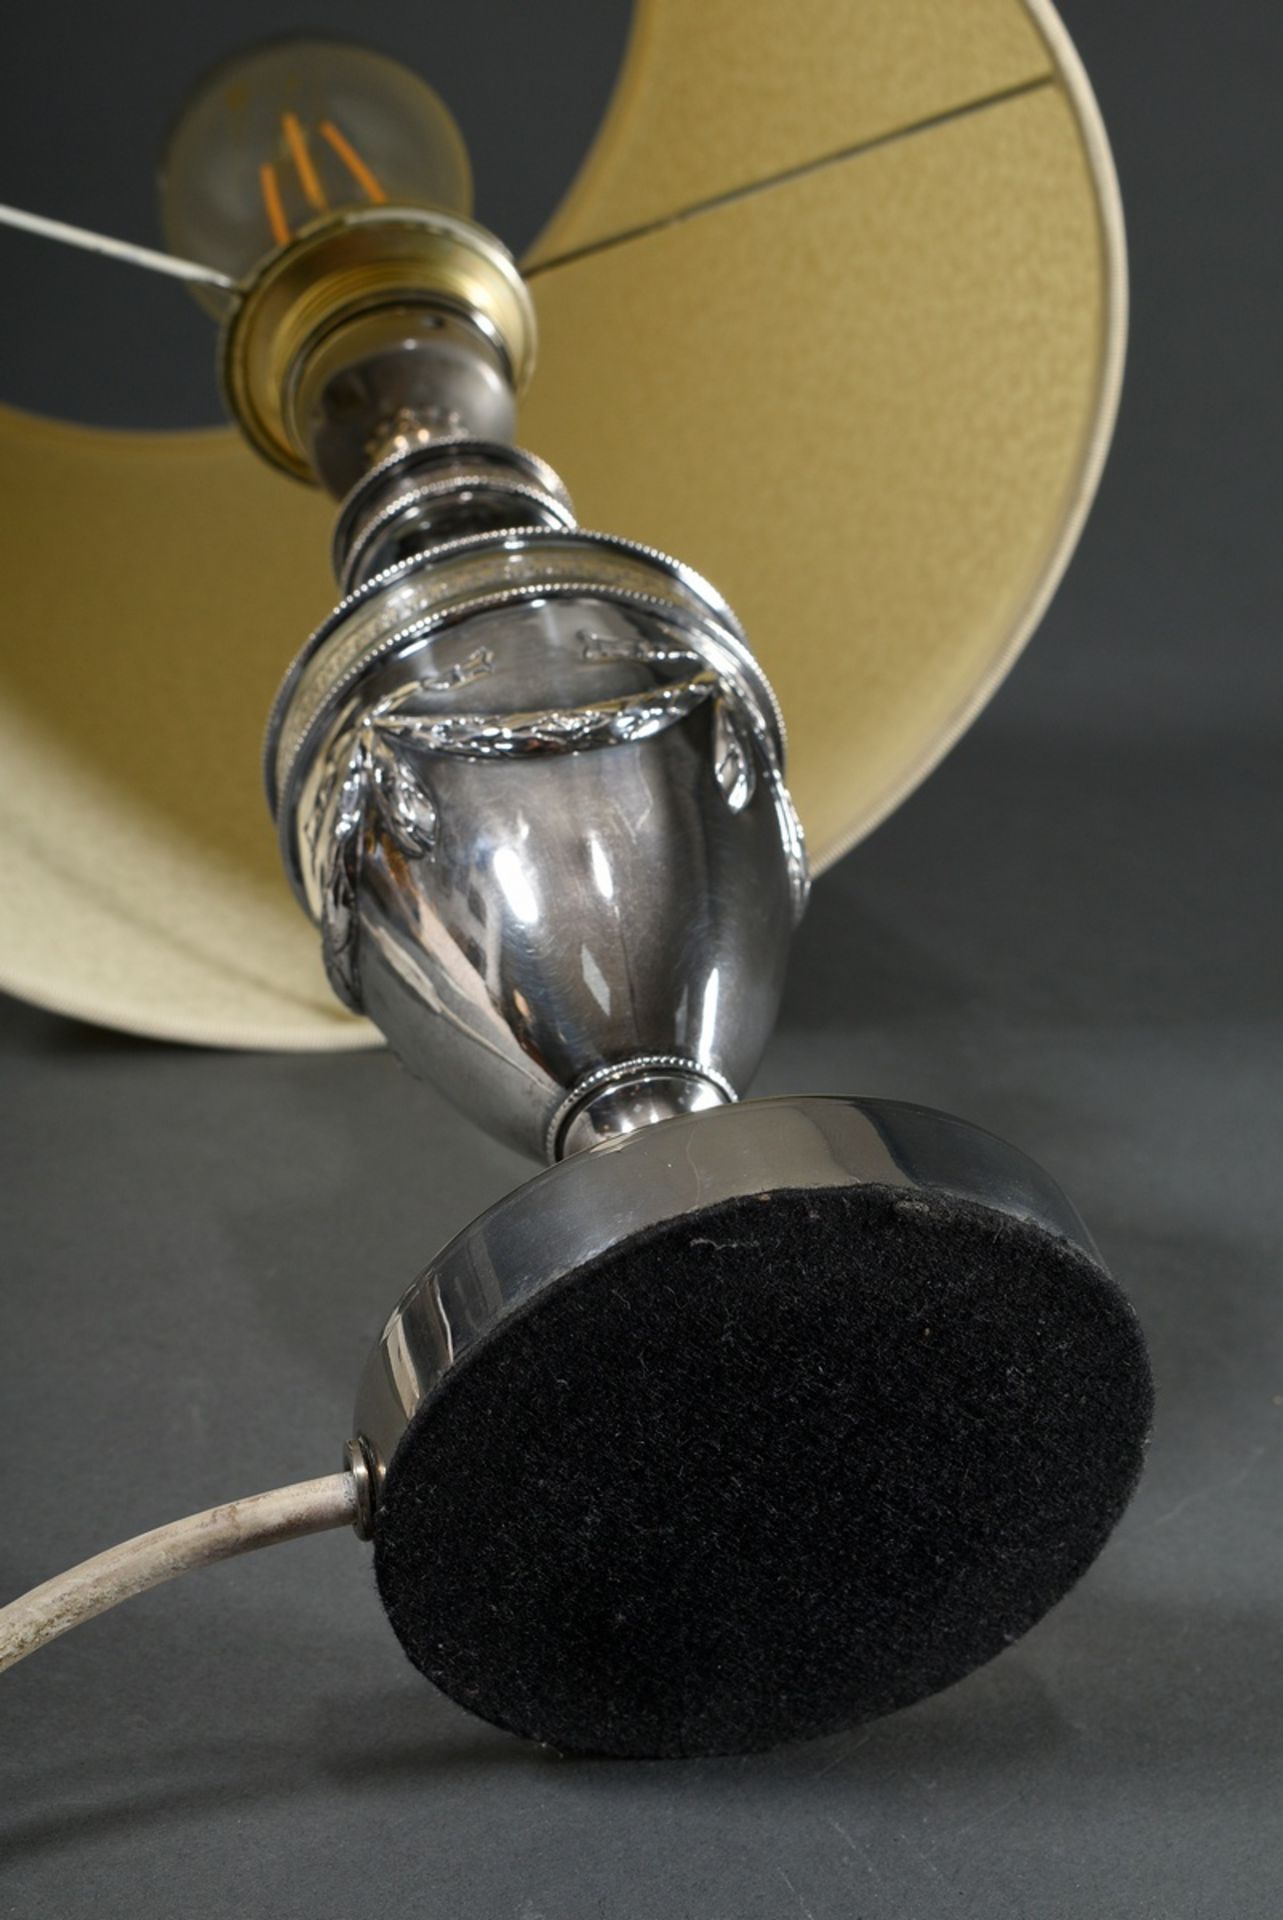 Table lamp with vase base in Louis XVI style, maker's mark indistinct, around 1900, silver 800 (fil - Image 4 of 4